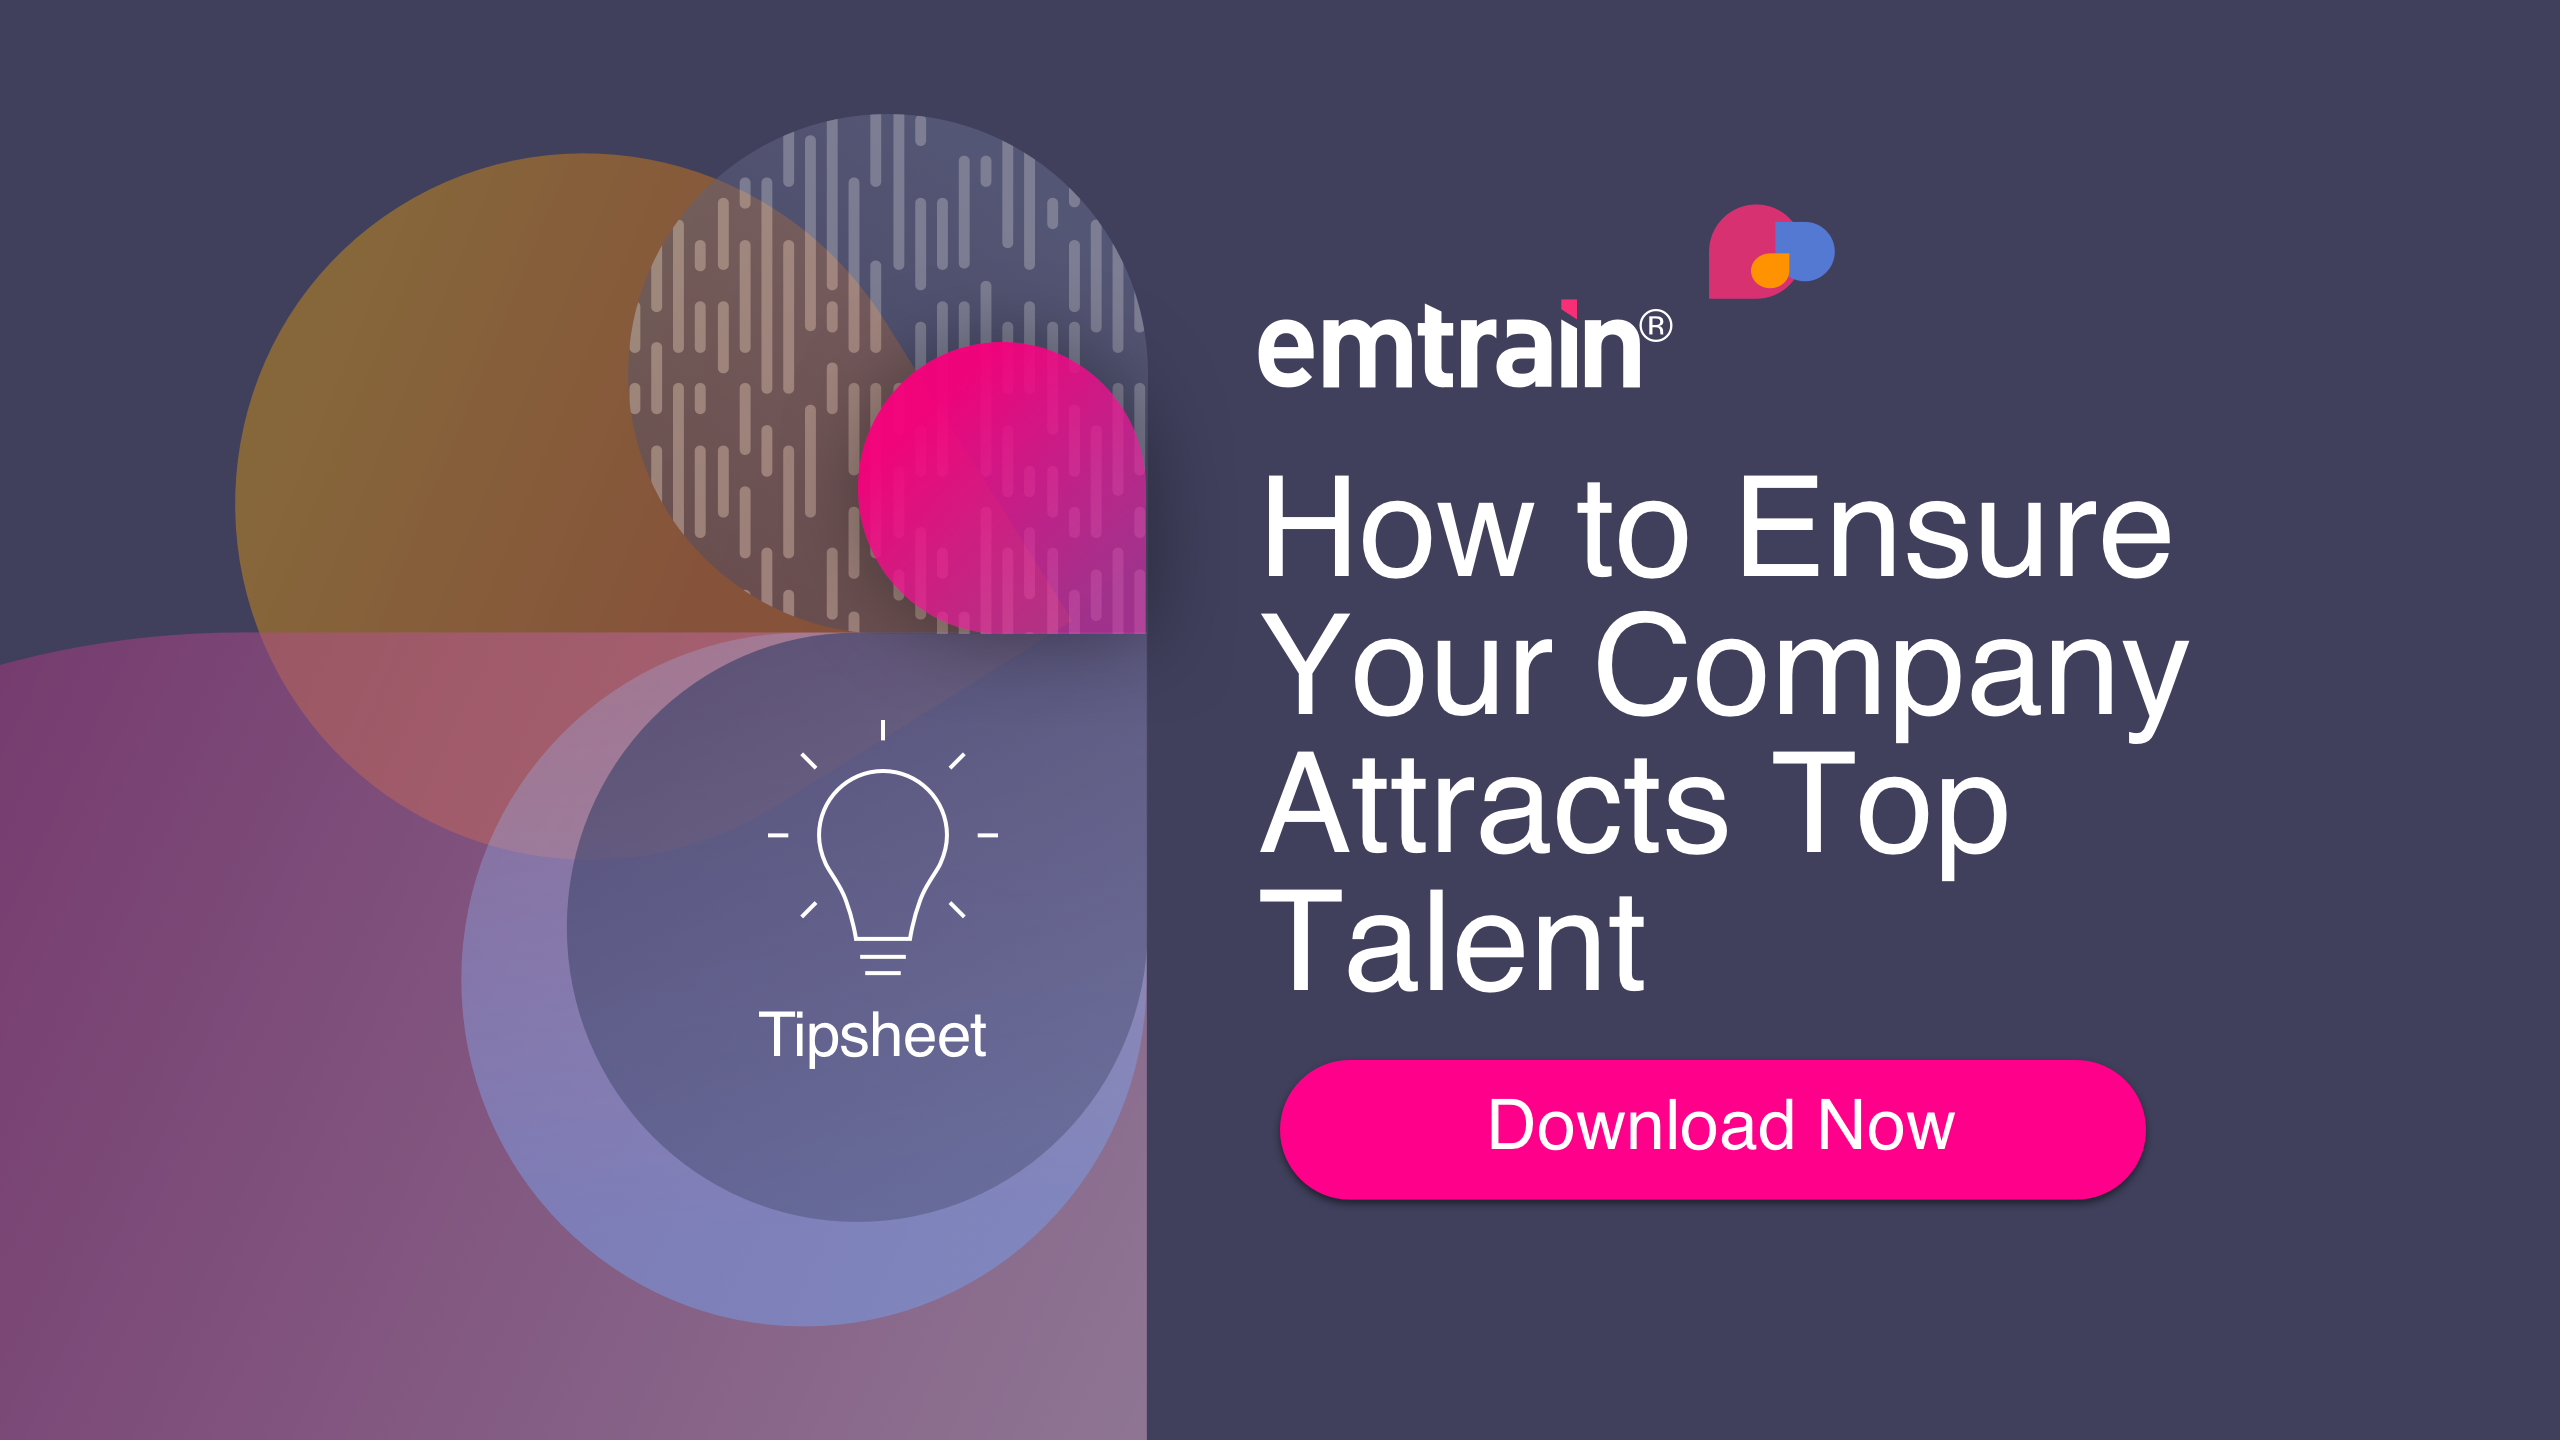 How to Ensure Your Company Attracts Top Talent